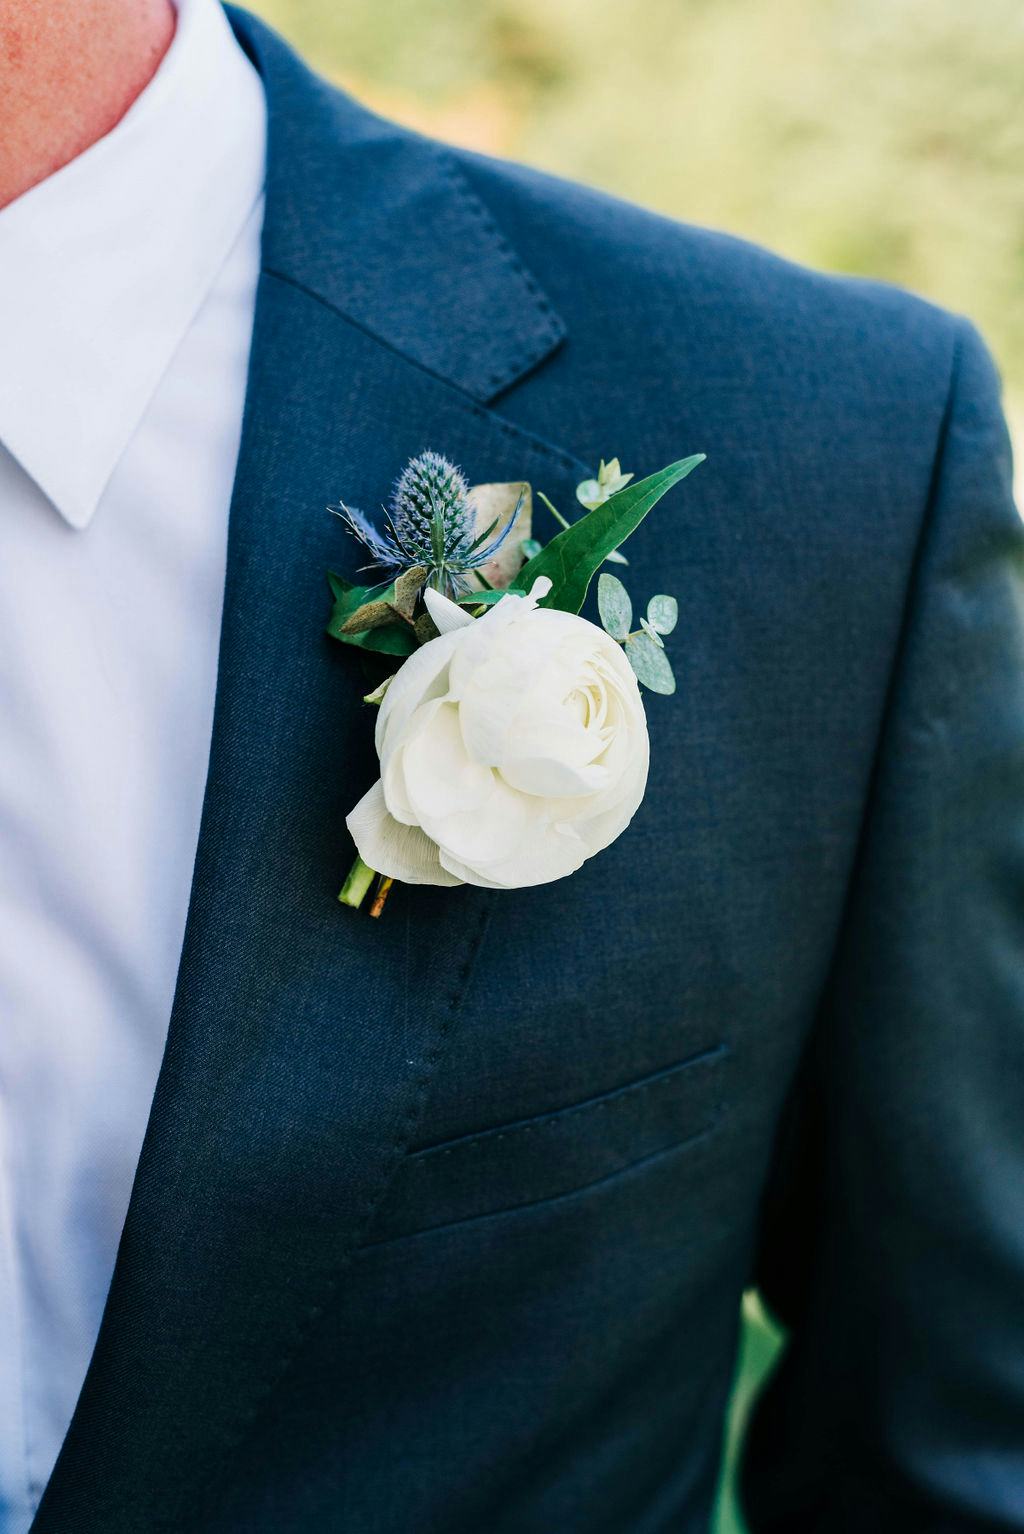 How to place and pin your wedding boutonniere for men.